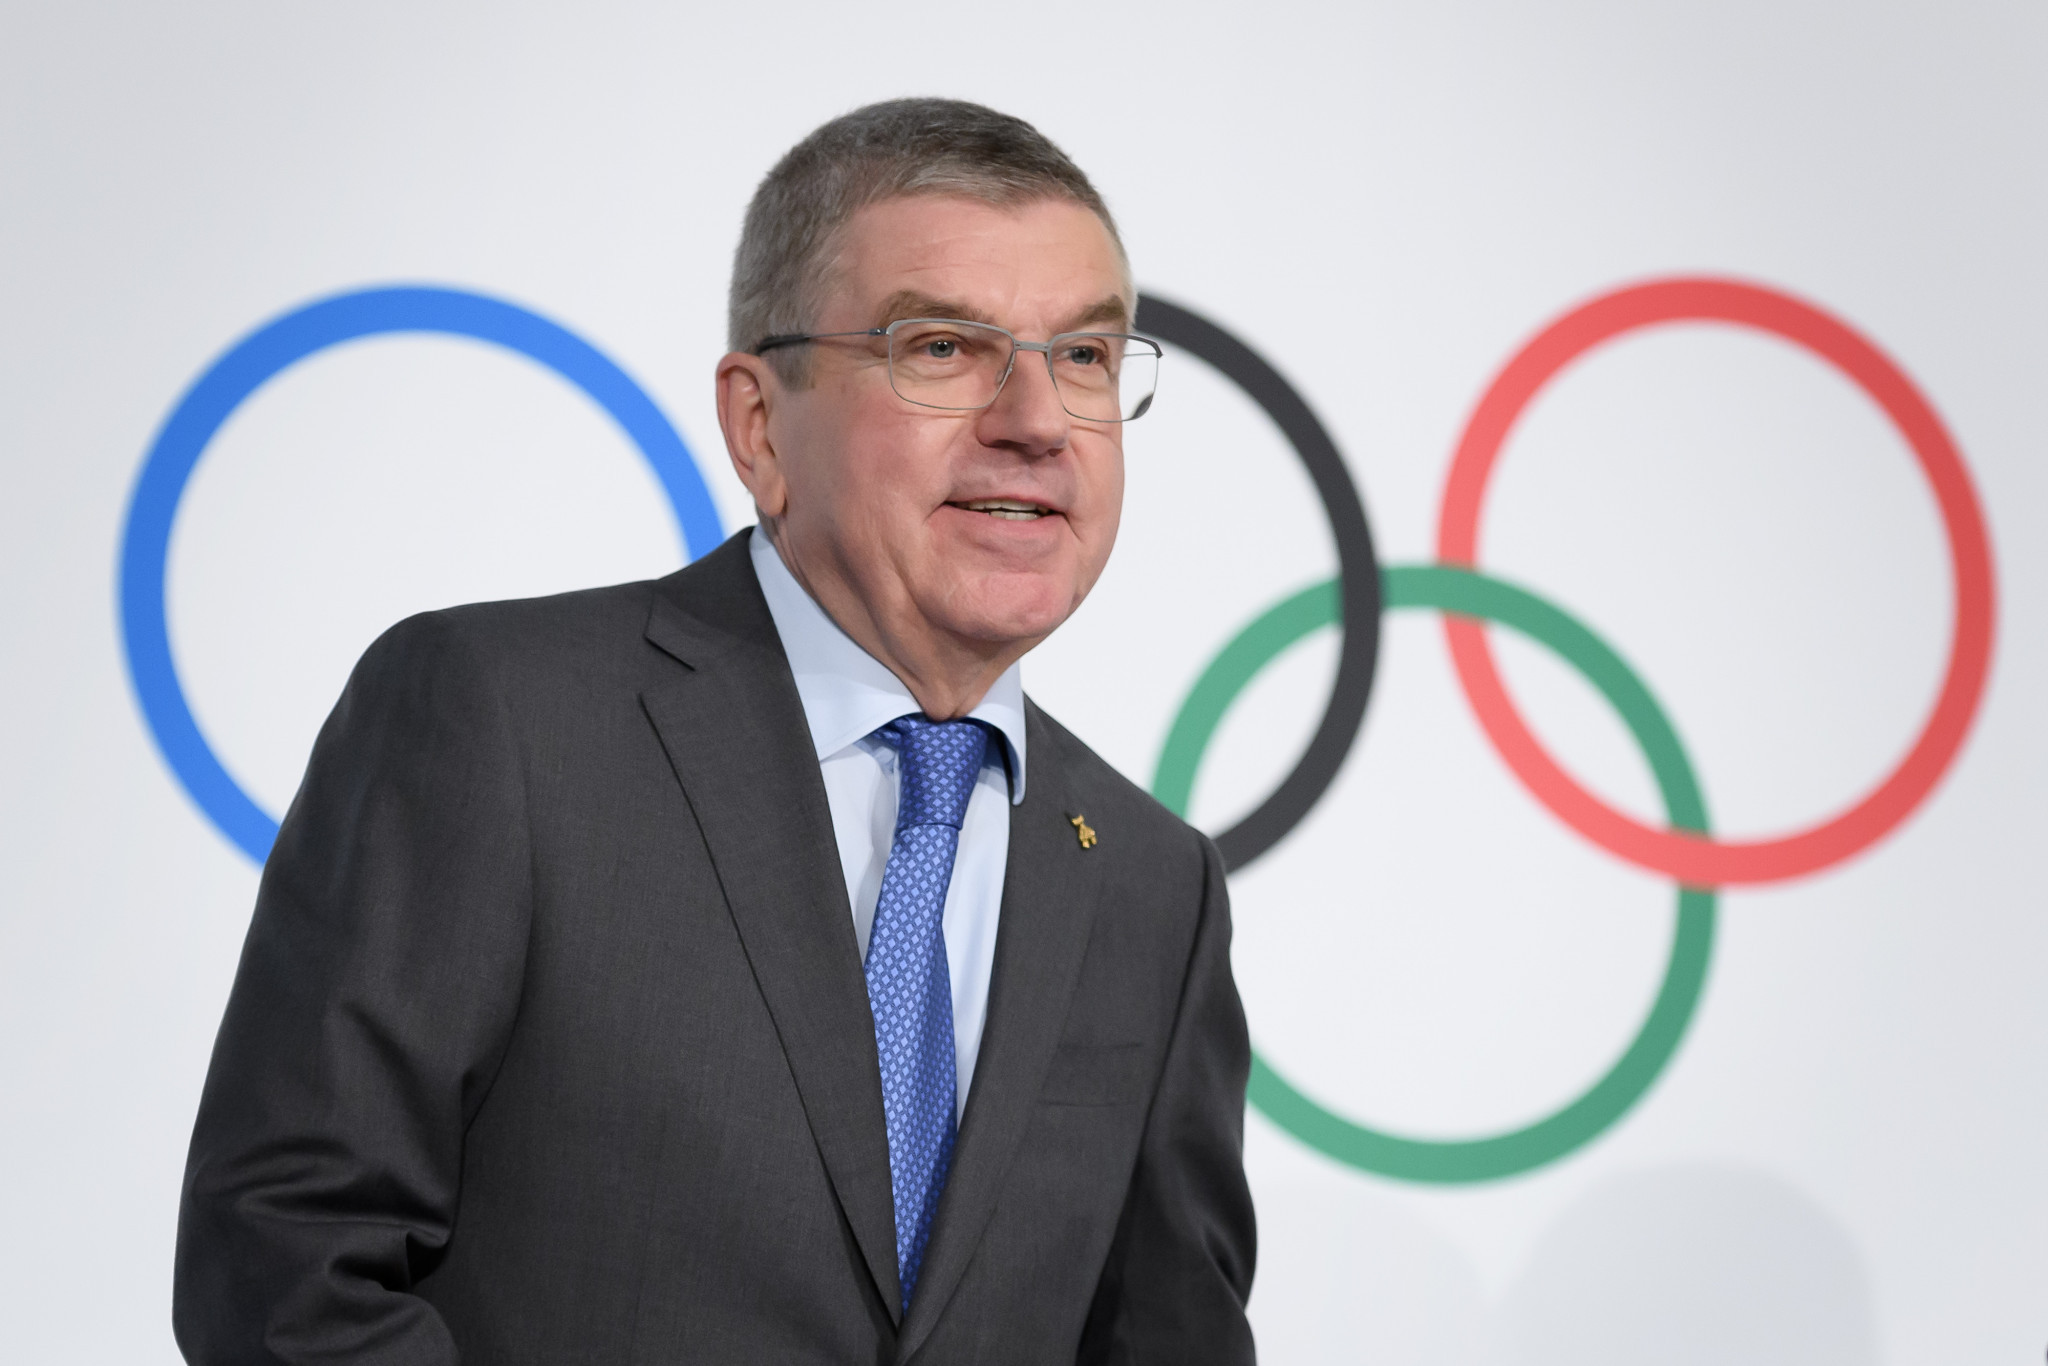 IOC President Thomas Bach said a continued conflict of interest was preventing Sebastian Coe from becoming a member ©Getty Images